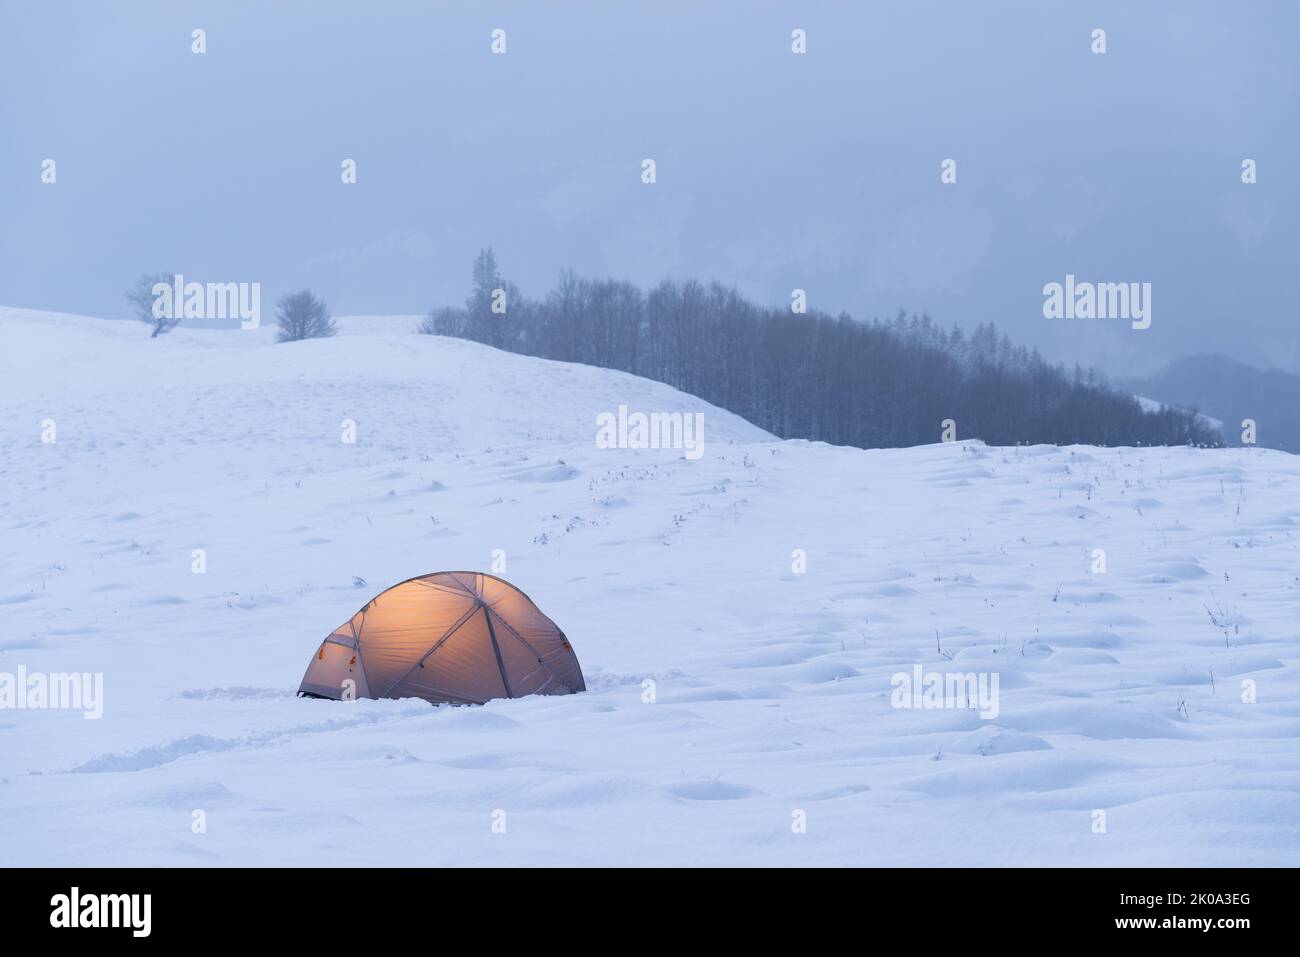 Winter view with tourist tent in snowy mountains Stock Photo